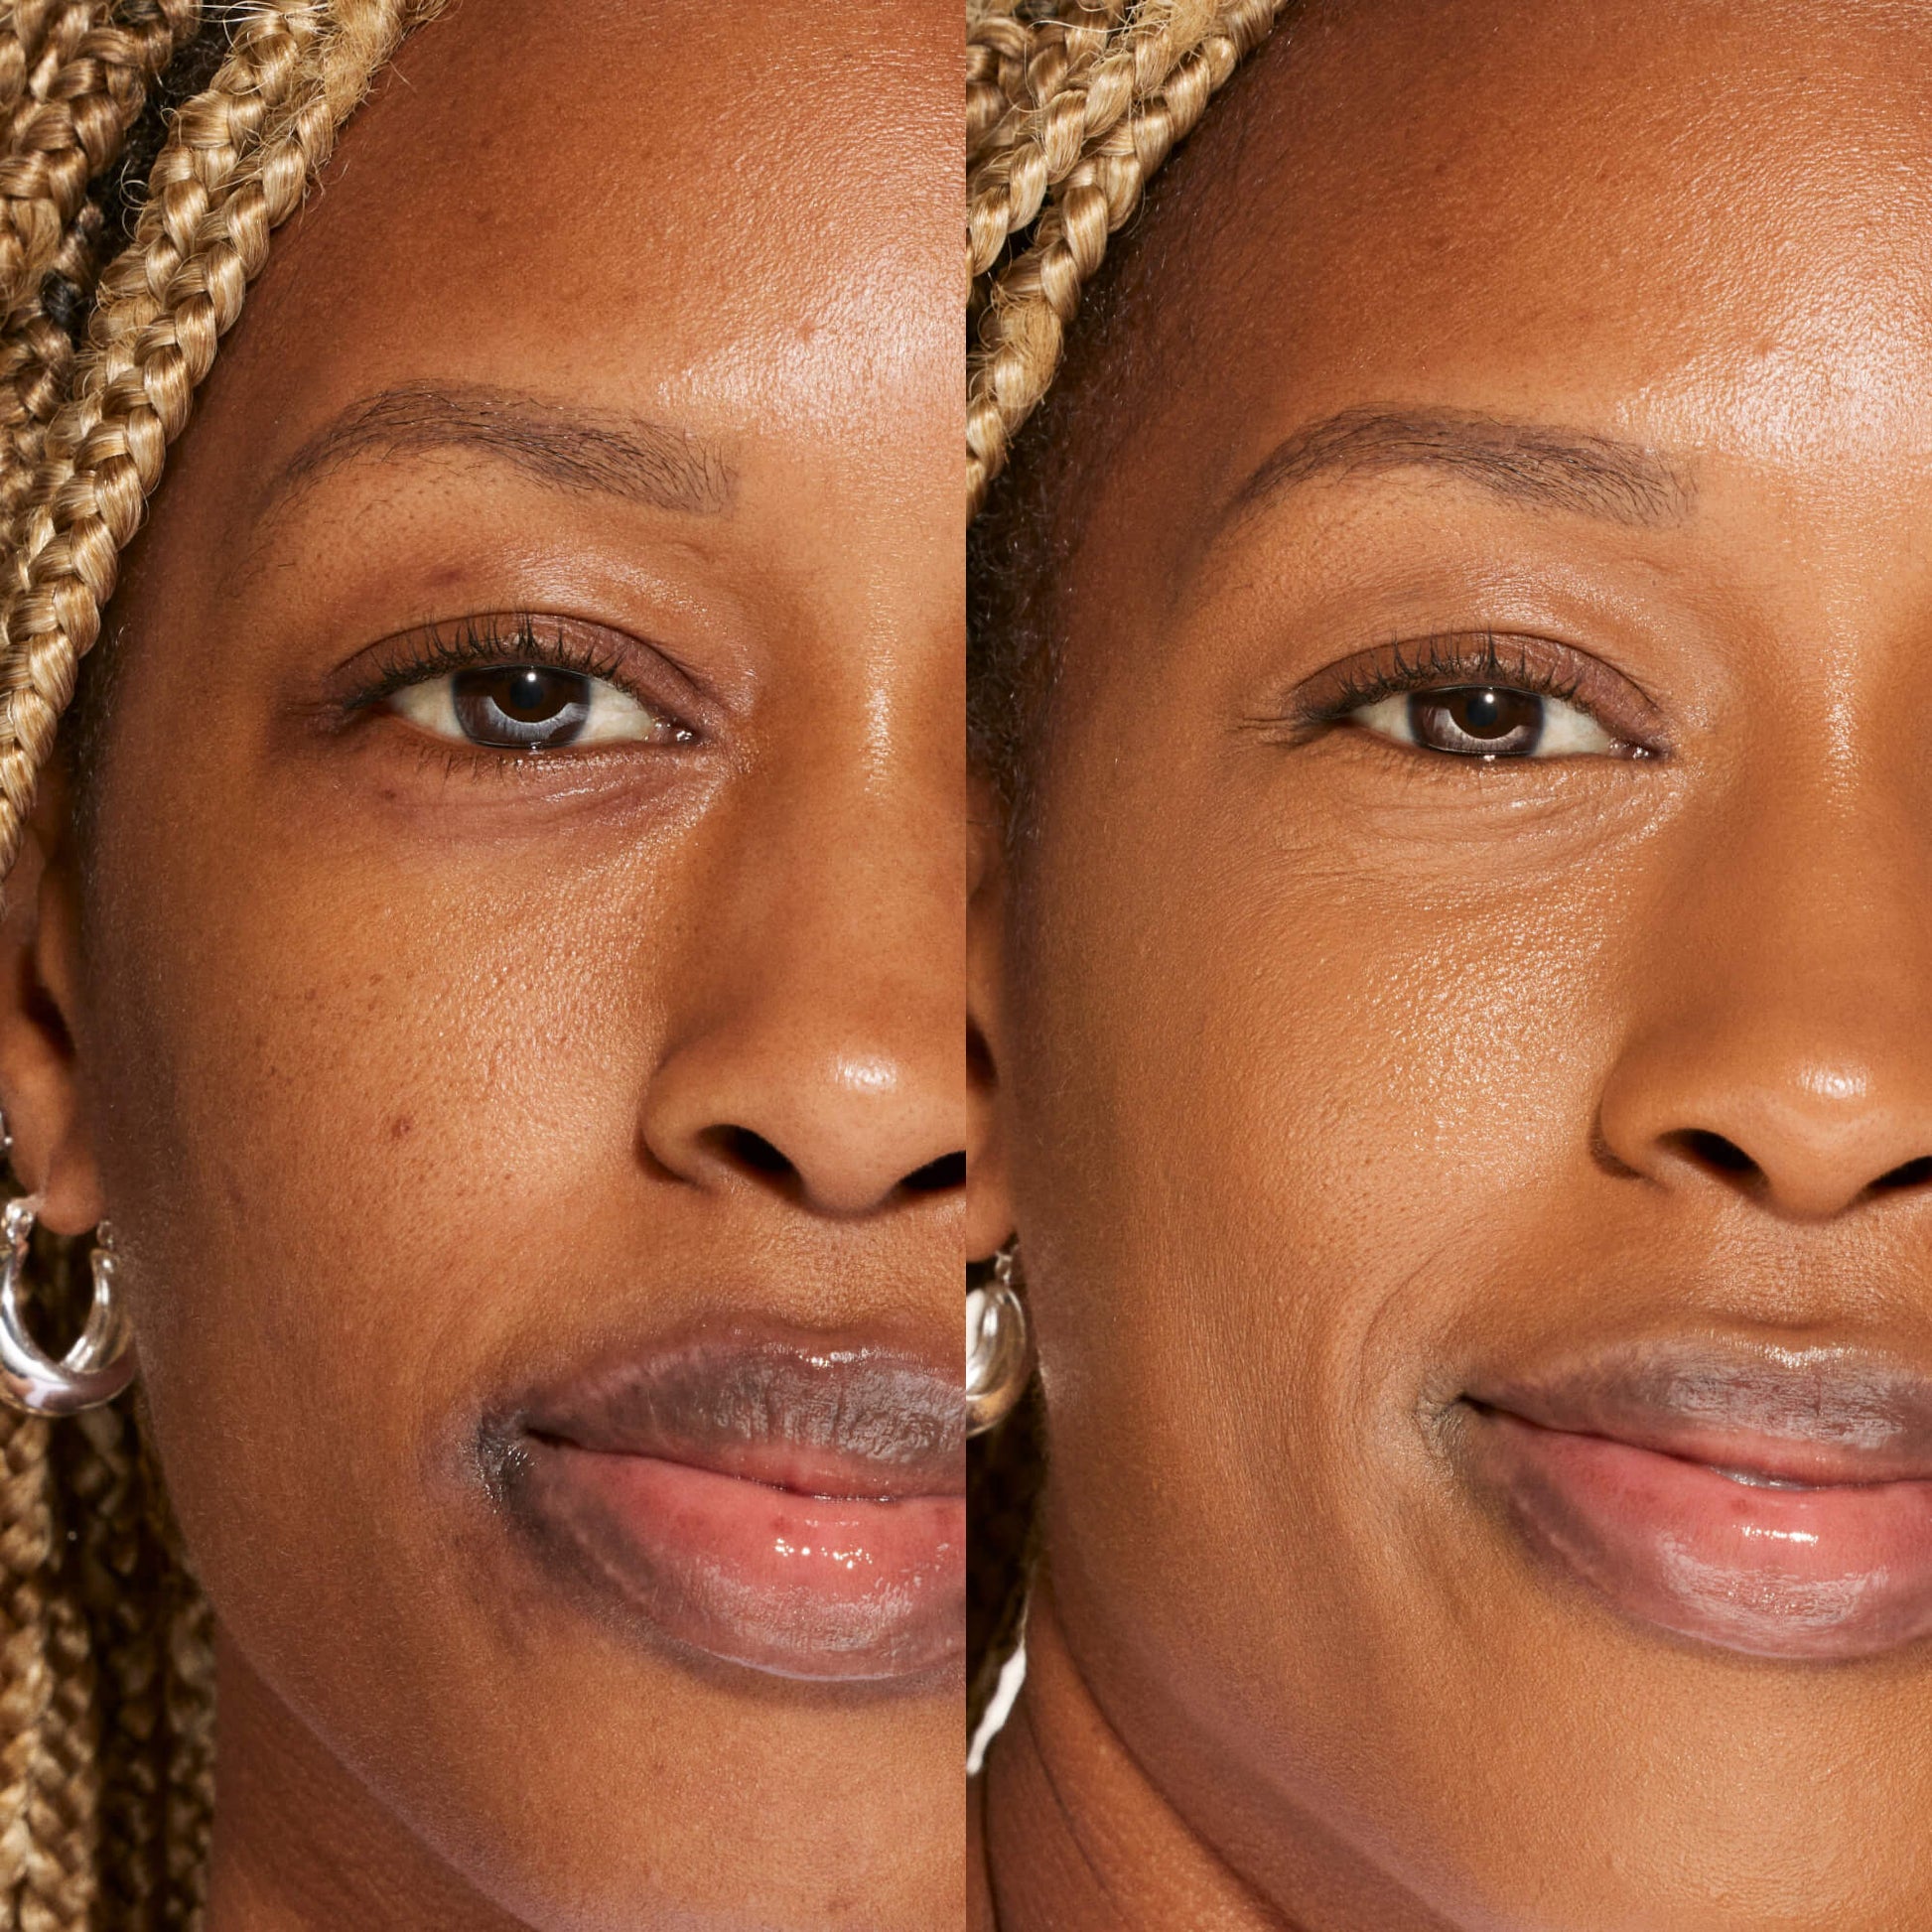 A person's face before and after using Tower 28 Beauty's Swipe Serum Concealer in shade 16.0 SB to cover up dark circles, blemishes, and discoloration